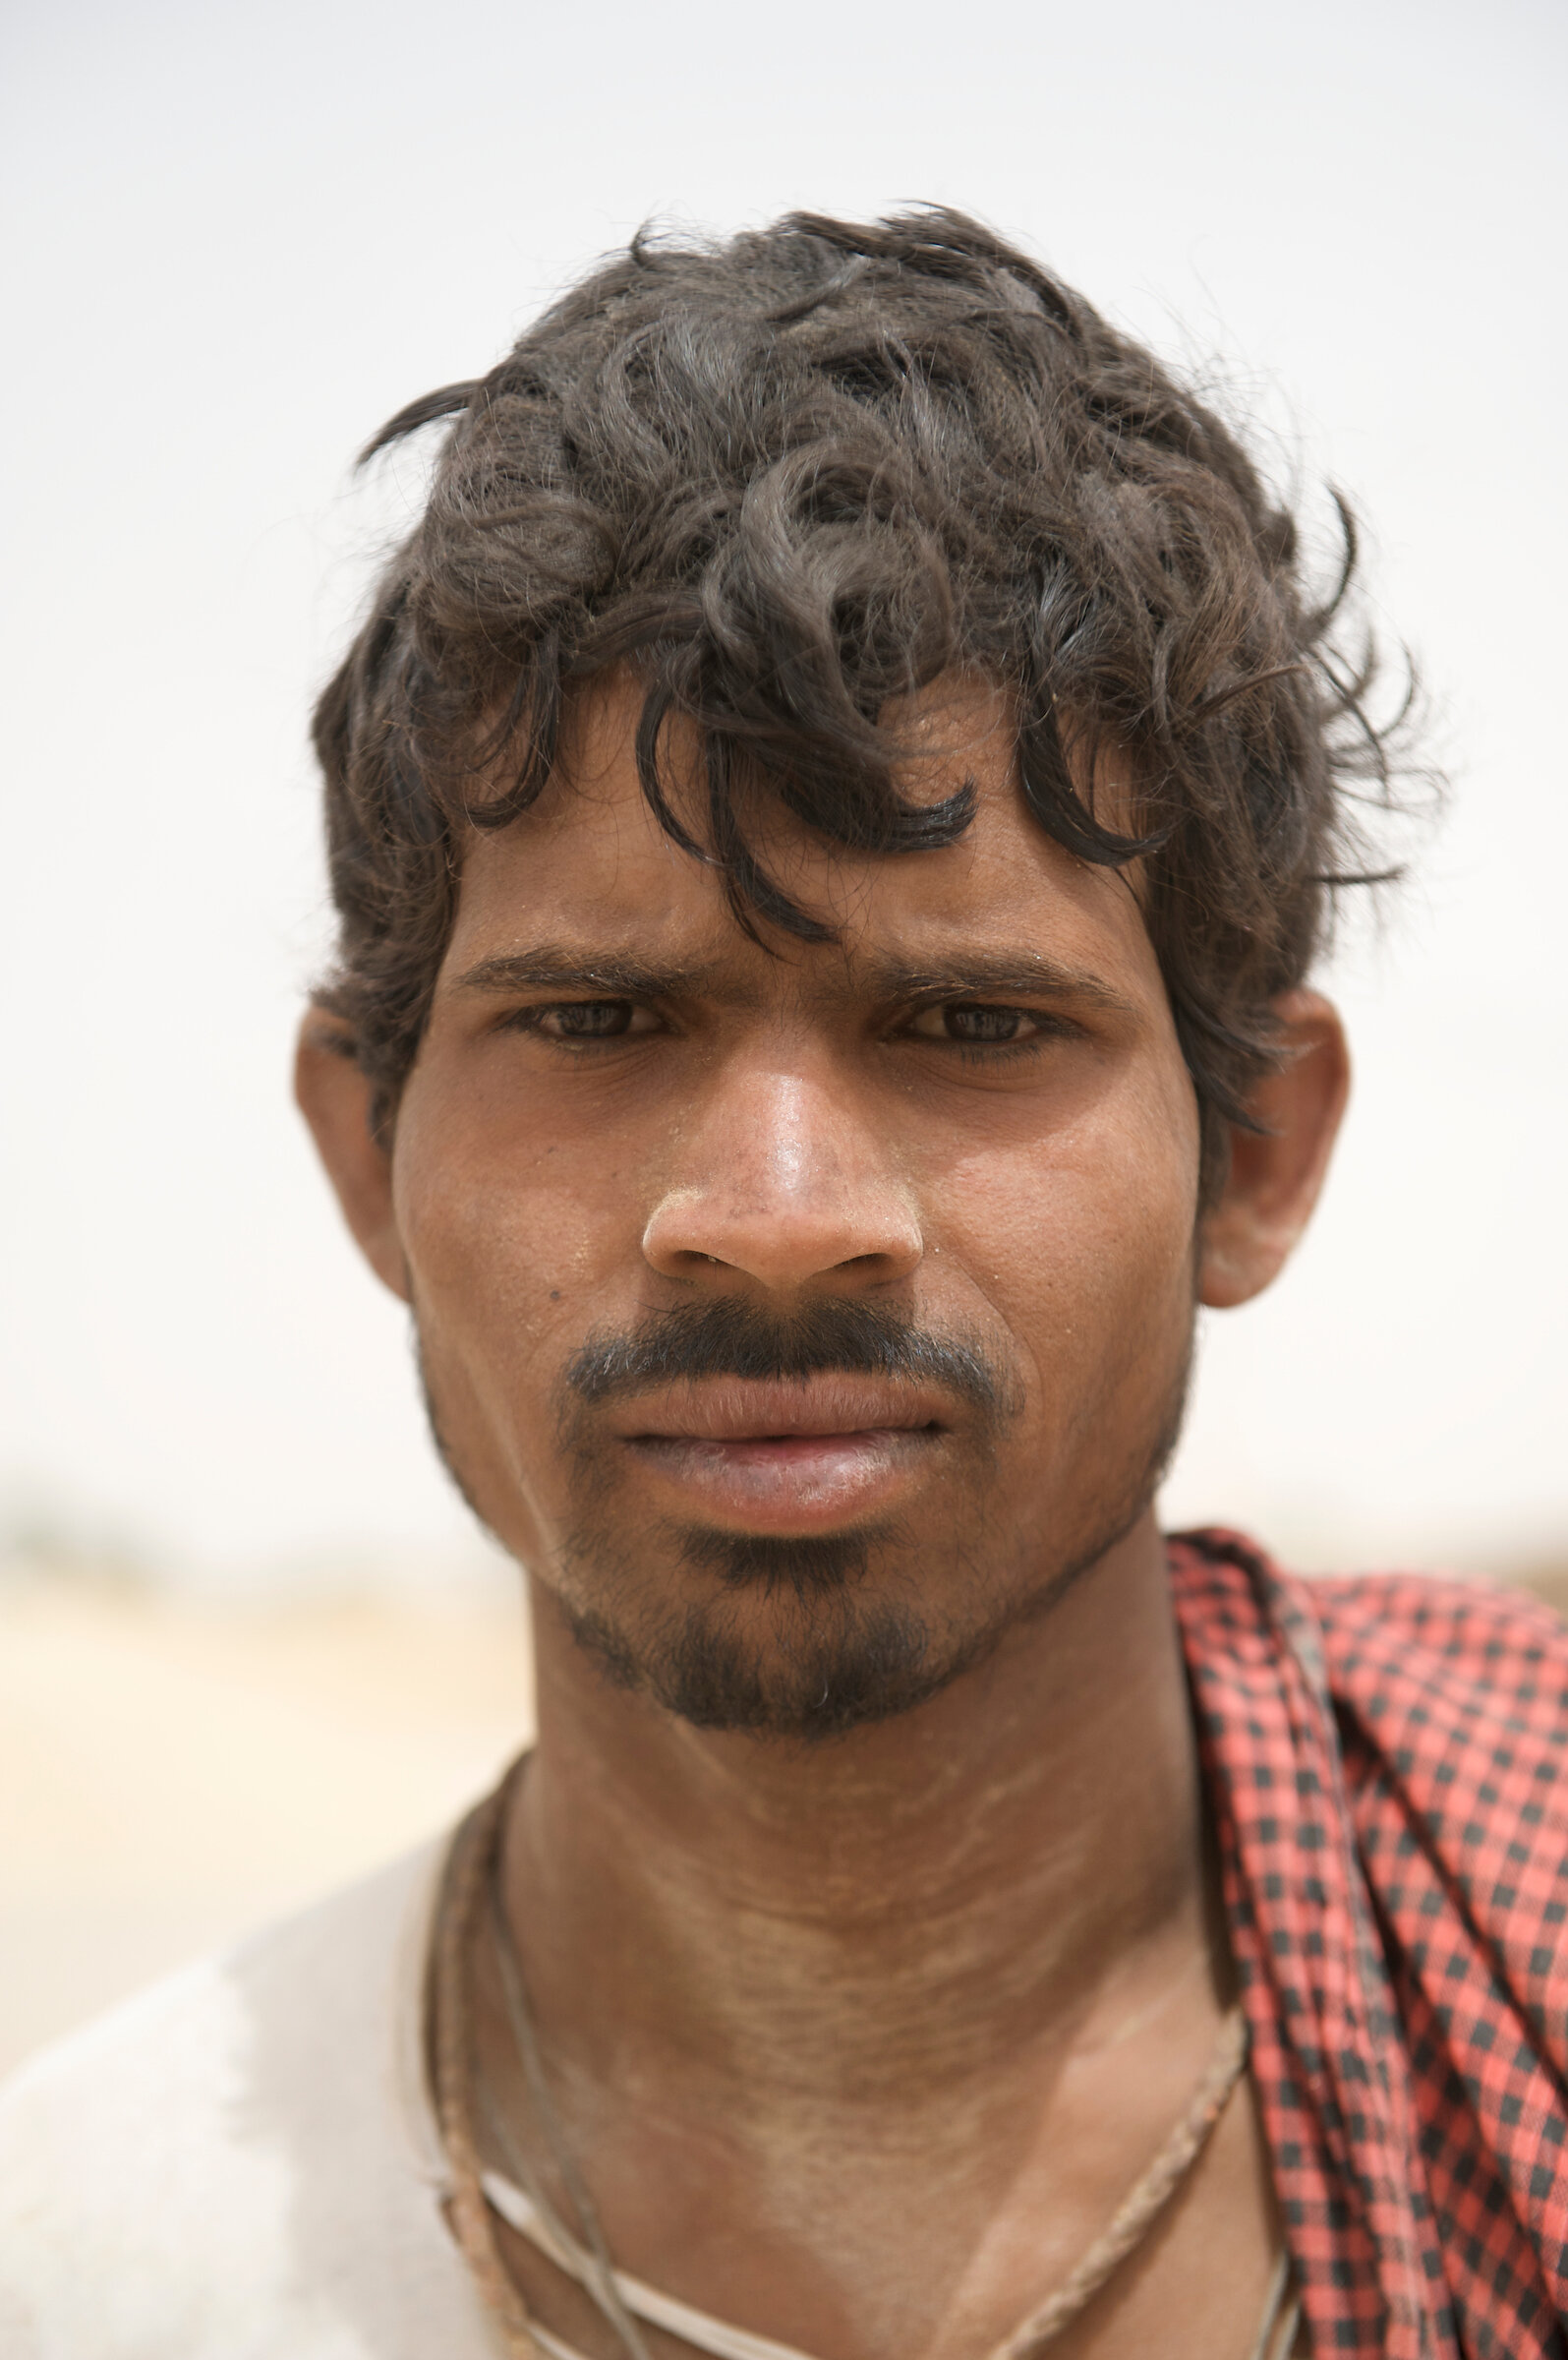  Untouchable caste brick maker - Rajasthan, India (please ask for specific location) 